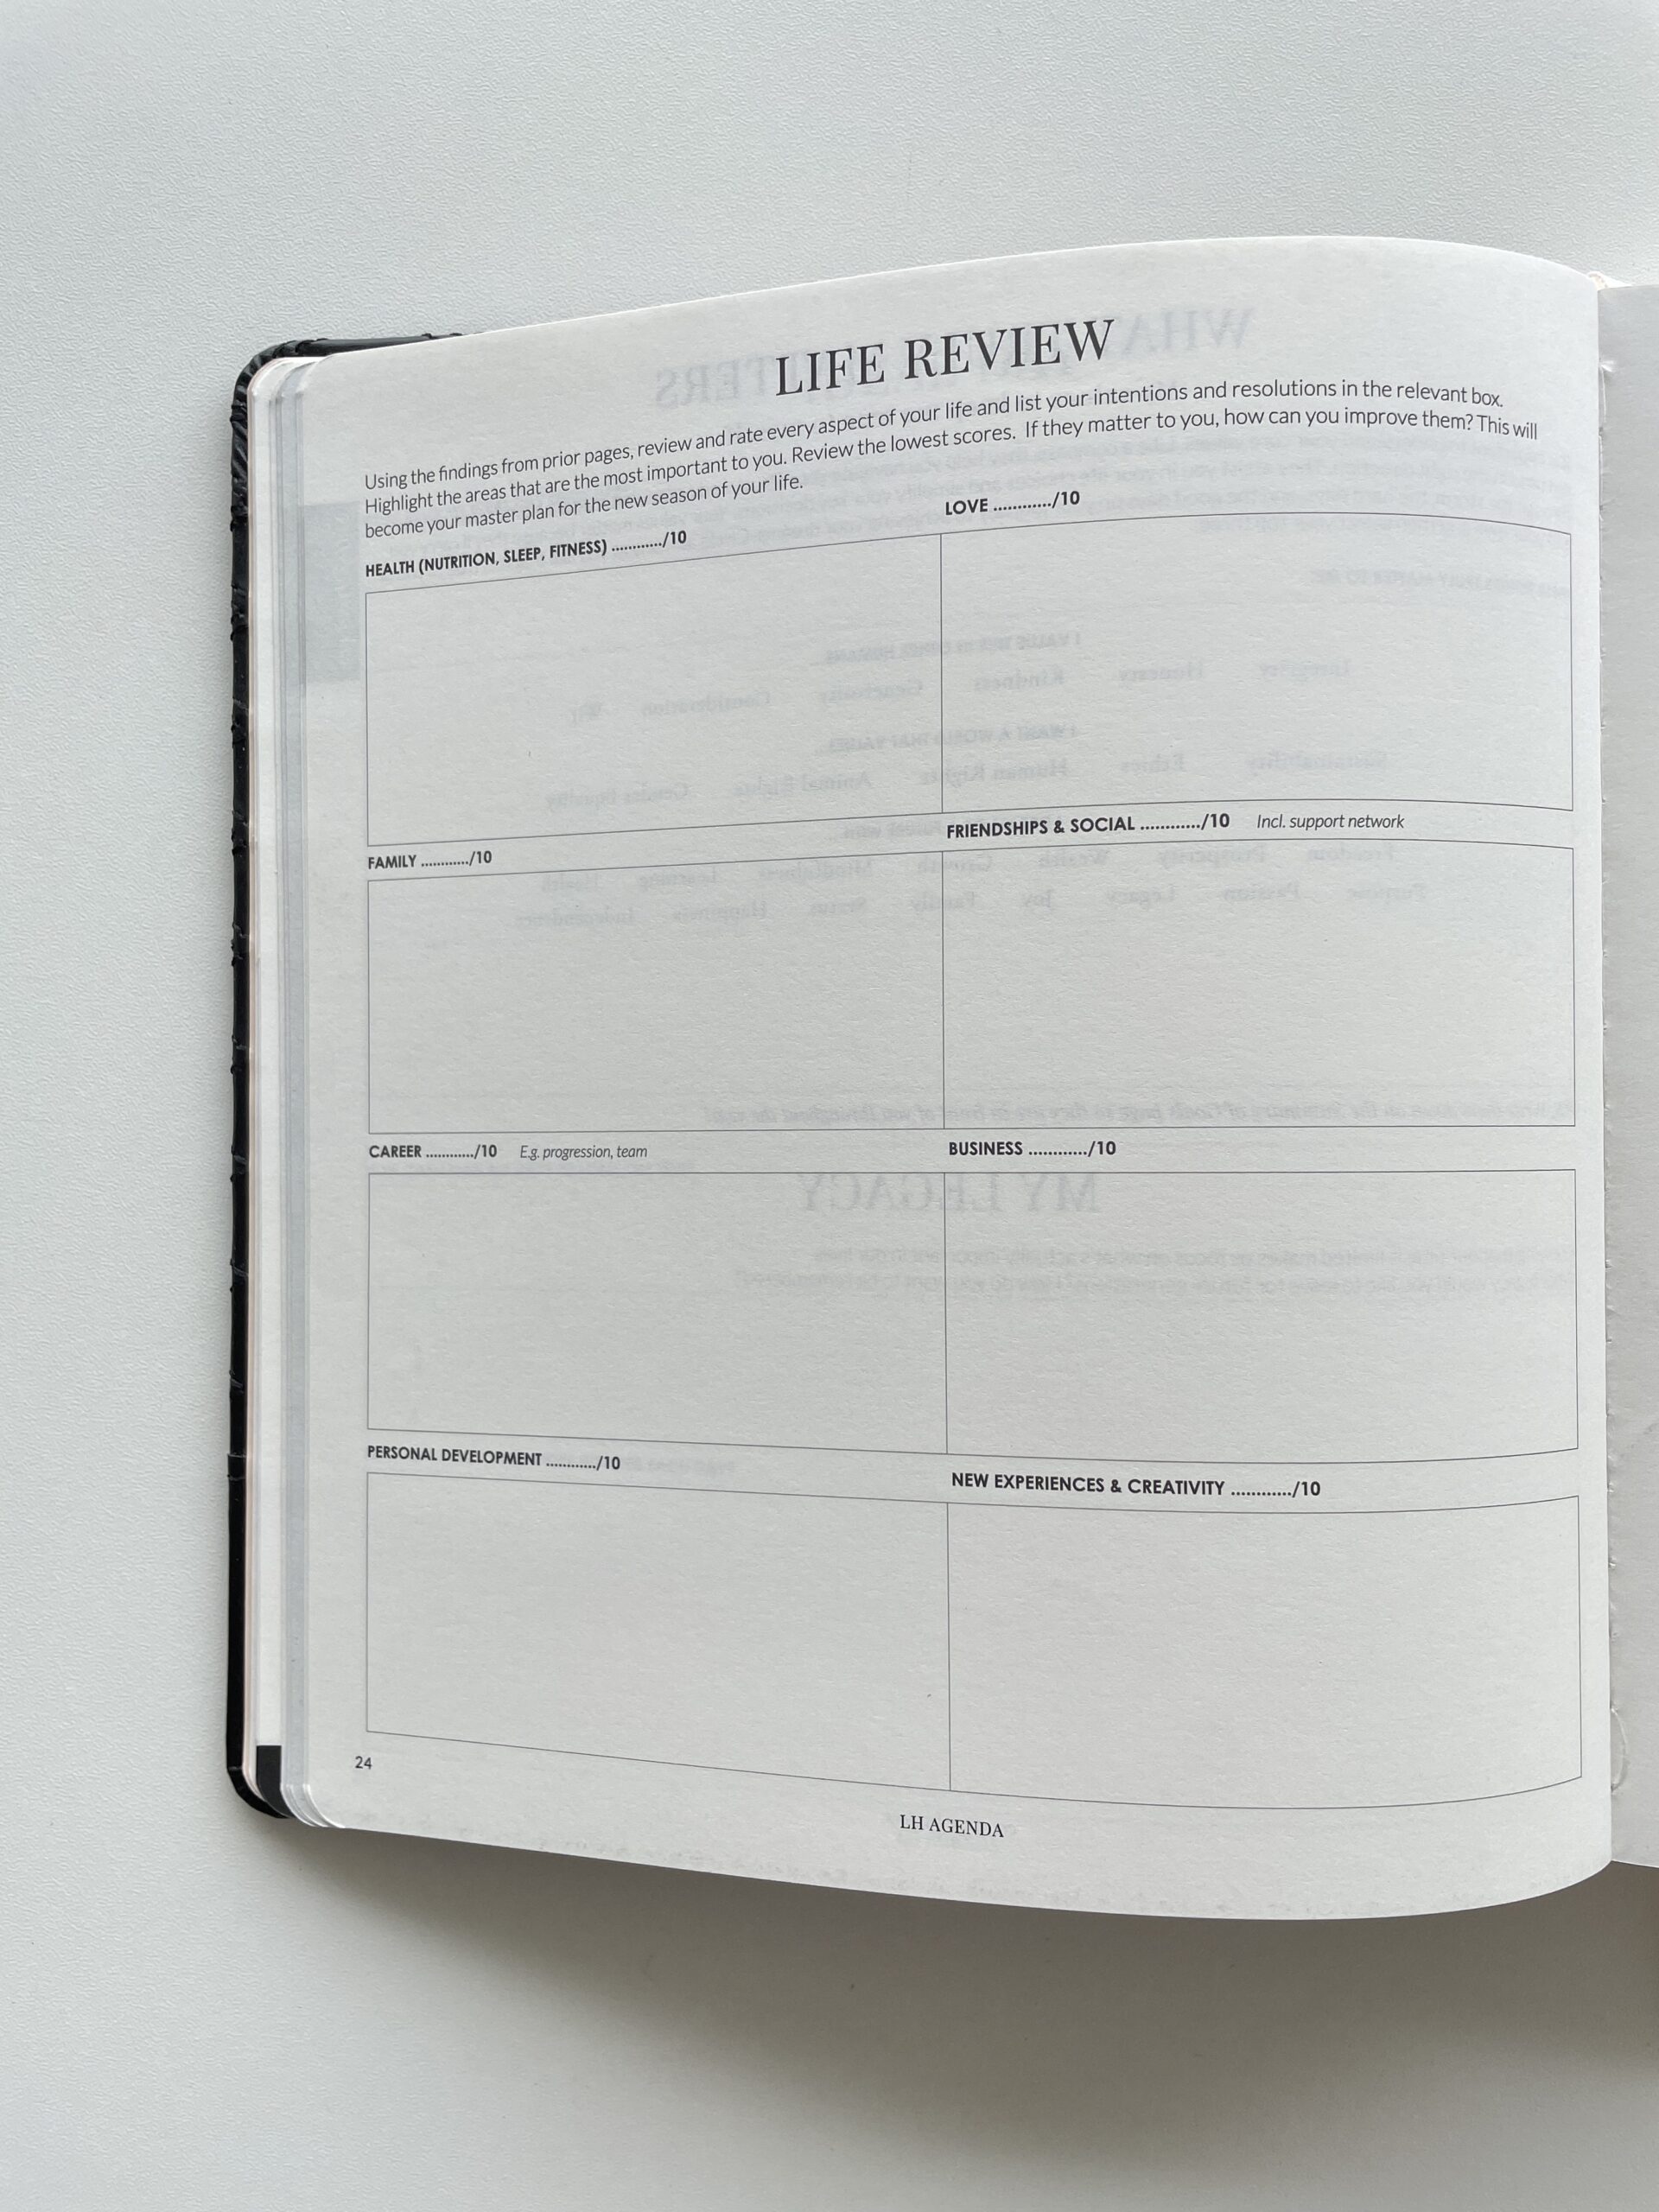 LH Agenda planner life review fitness health money goals career work goal setting minimalist undated large sewn bound level 10 life rating